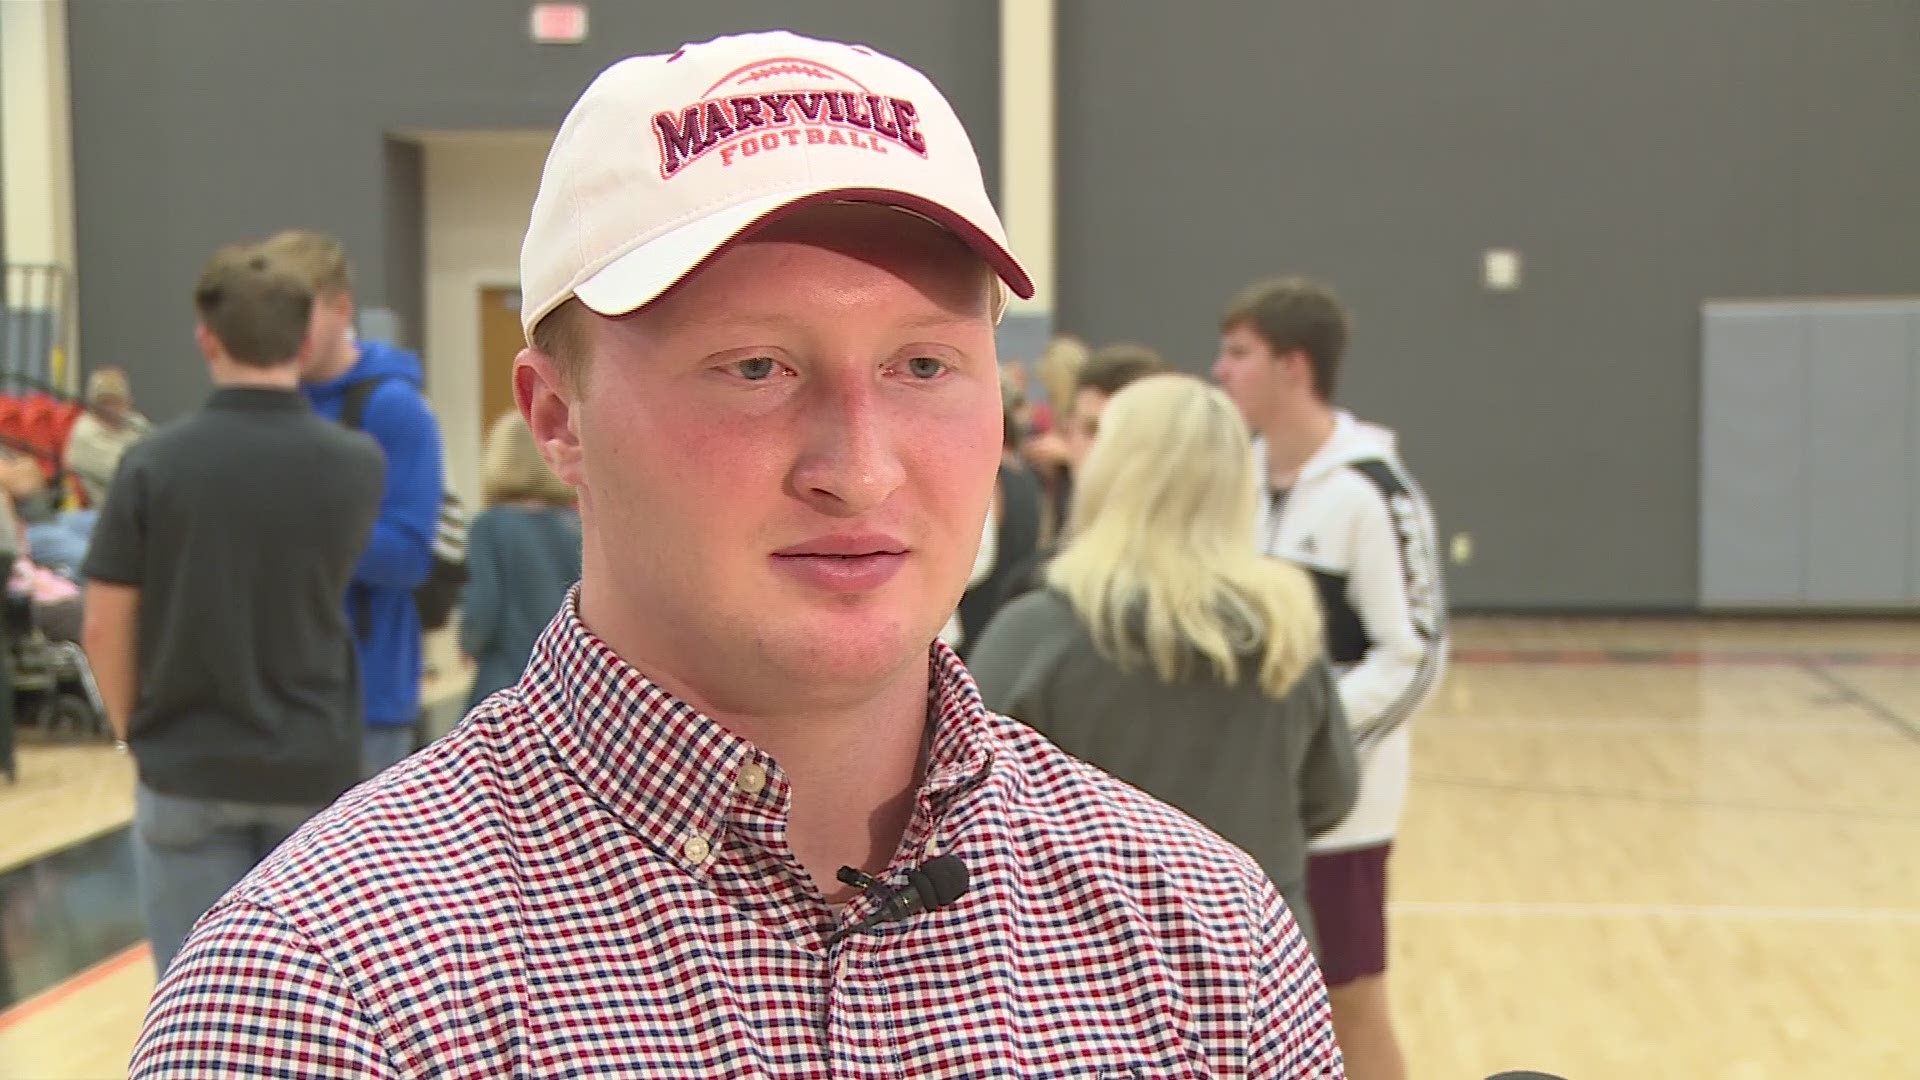 Josiah Millsaps is attending Maryville College to play football. After a car accident last year, he's incredibly happy to be in this moment.